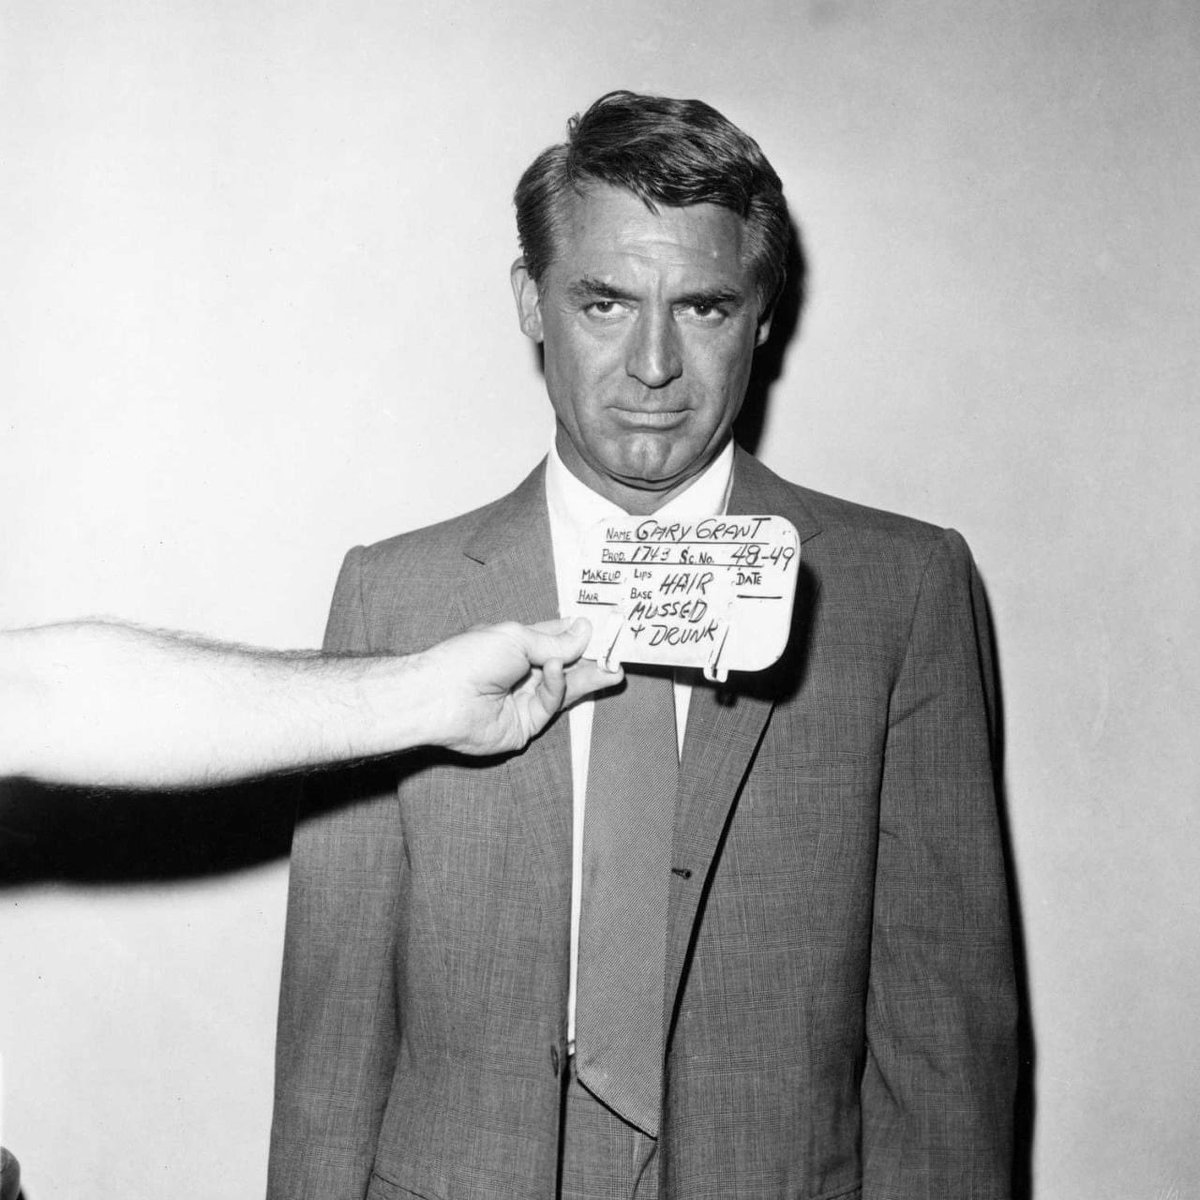 As he appears to be trending ... Here is Cary Grant's 'hair mussed and drunk' wardrobe test on the set of North by Northwest’. Still looking smarter, and certainly more stylish, than just about anyone else. #CaryGrant